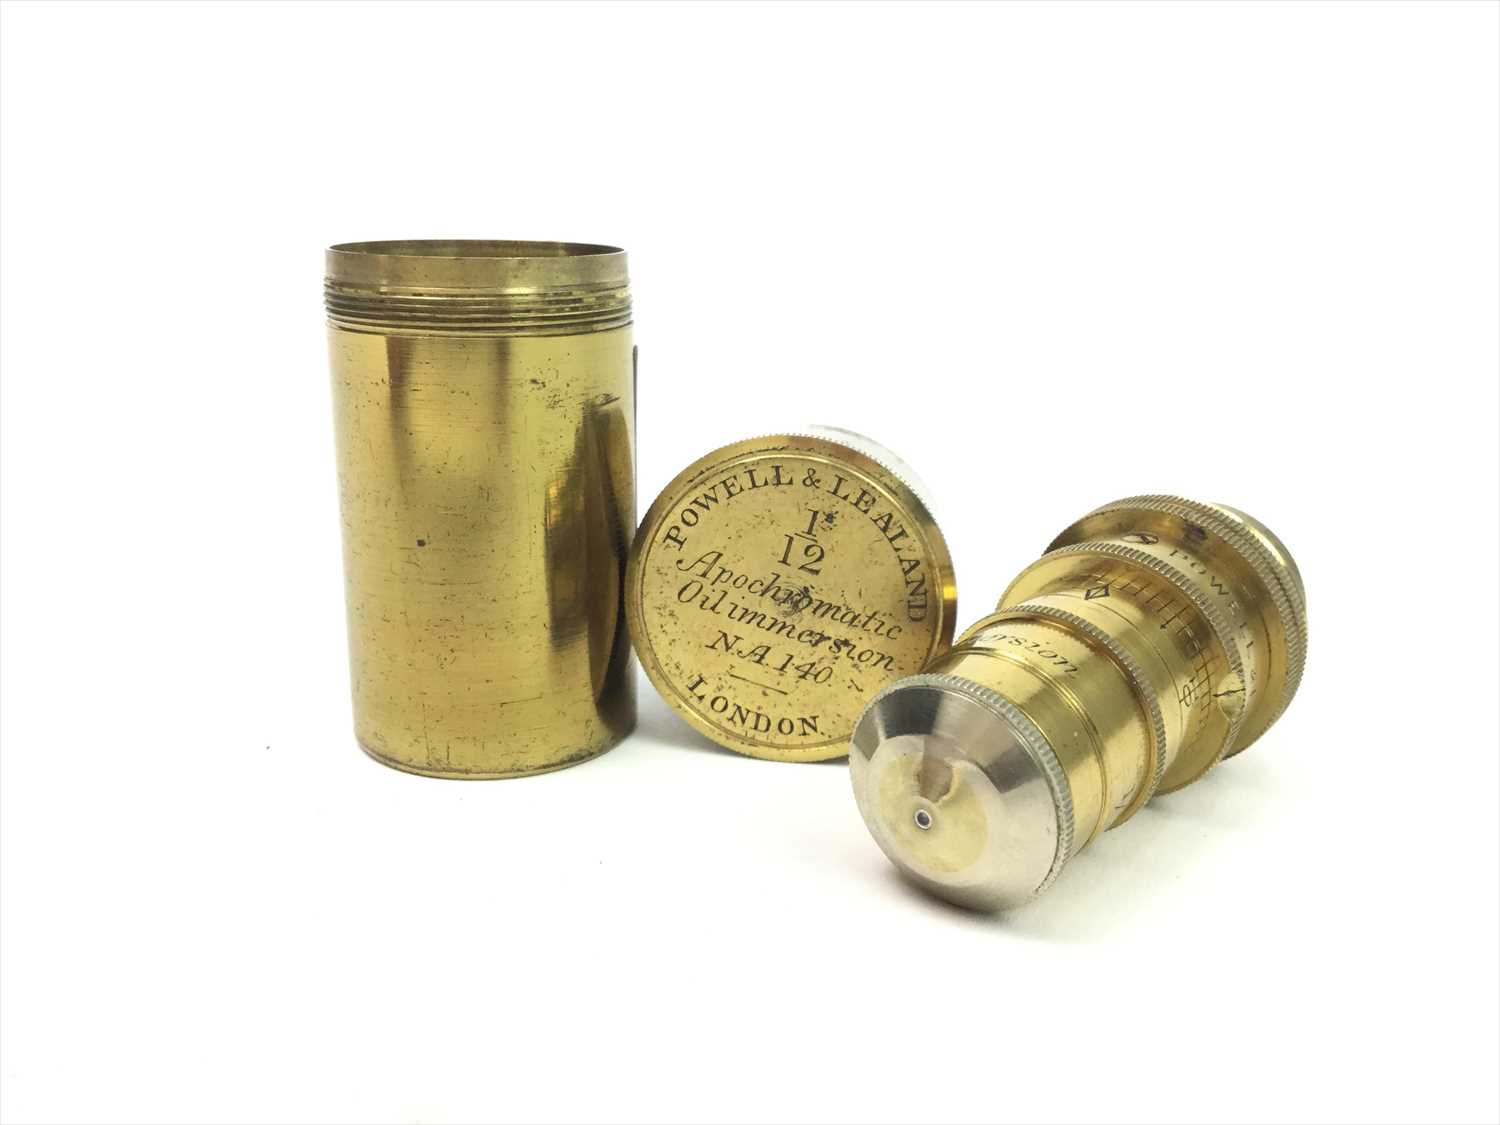 Lot 1188 - A LATE VICTORIAN POWELL & LEALAND 1/12" APOCHROMATIC OIL IMMERSION OBJECTIVE LENS